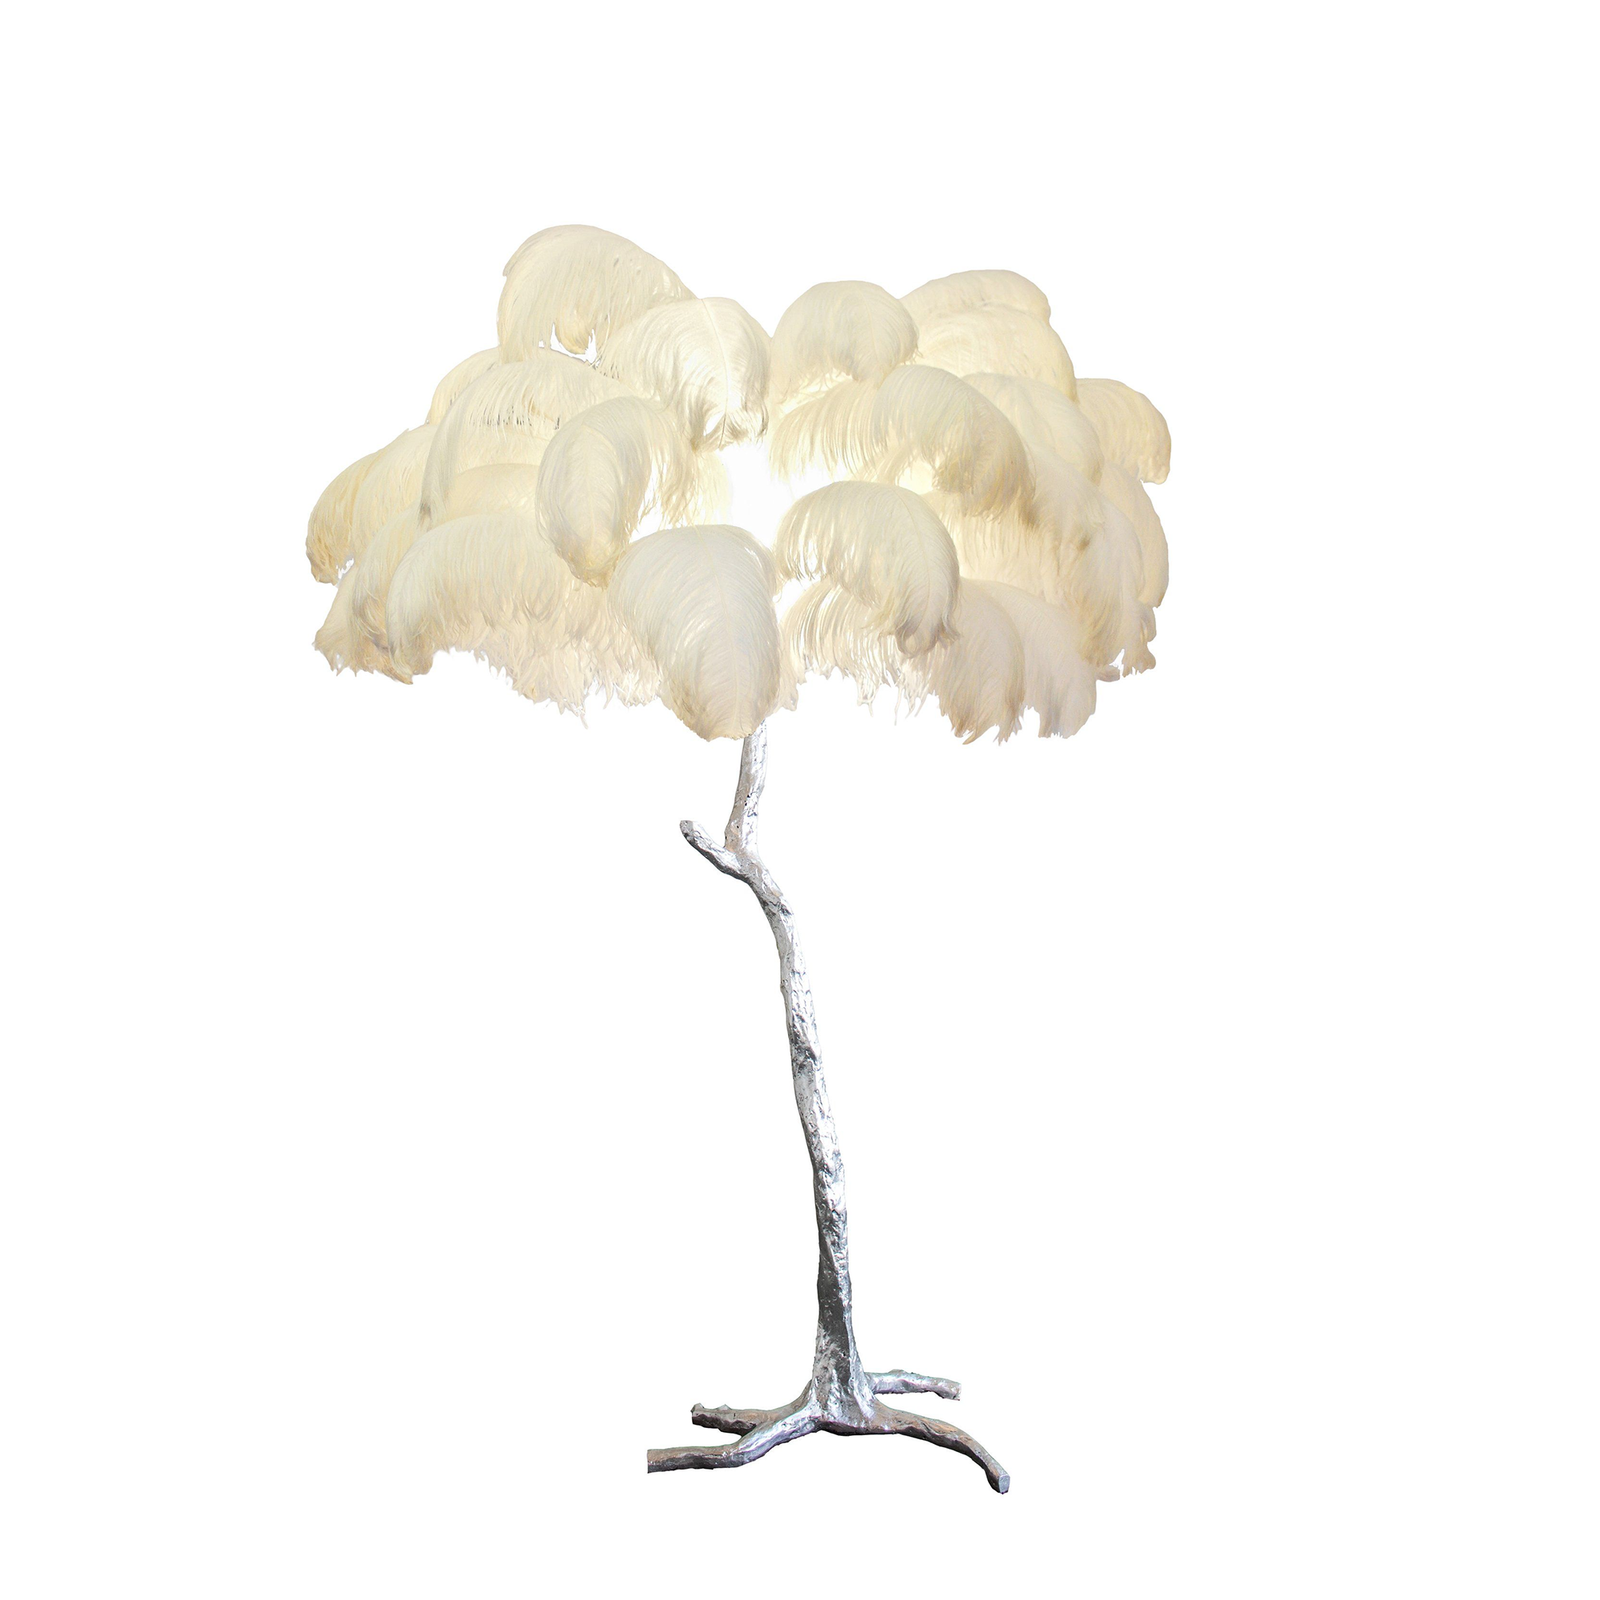 Silver Natural Ostrich Feather Resin Floor Light - Diameter 39.4 inches x Height 63 inches (100cm x 160cm)